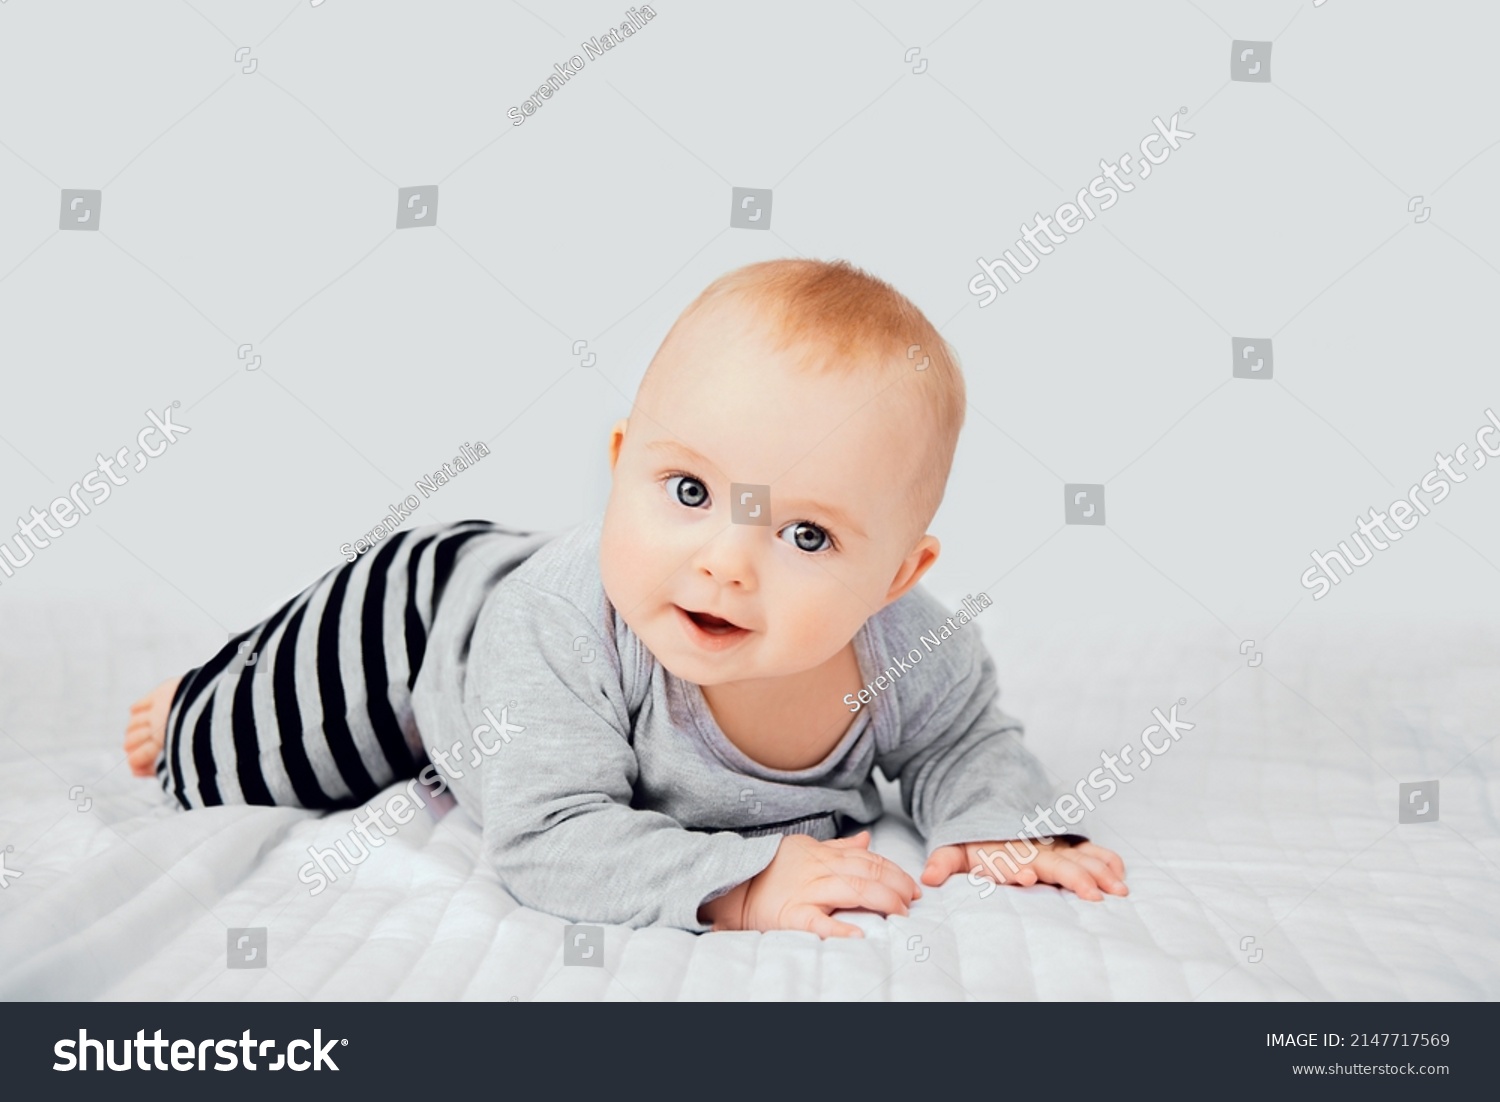 Seven month old baby child sitting on bed. Cute smiling little infant girl on white soft blanket. Charming blue eyed baby. Copy space. #2147717569